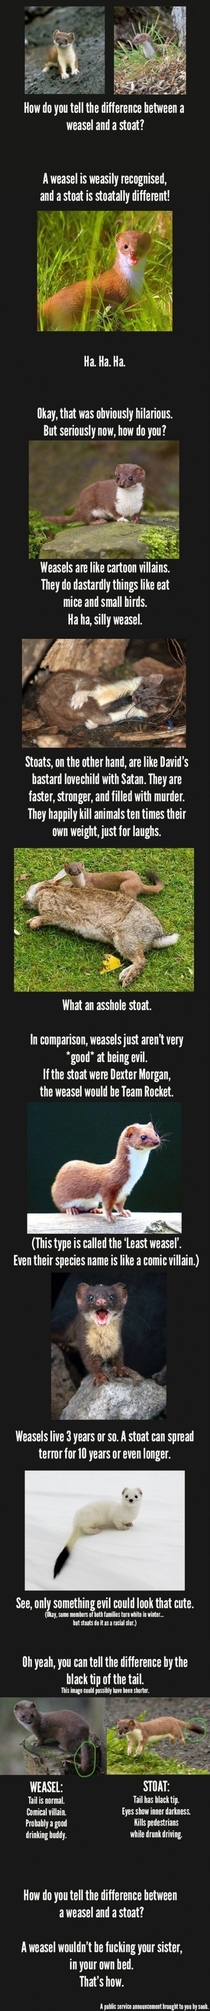 PSA How to tell a stoat from a weasel